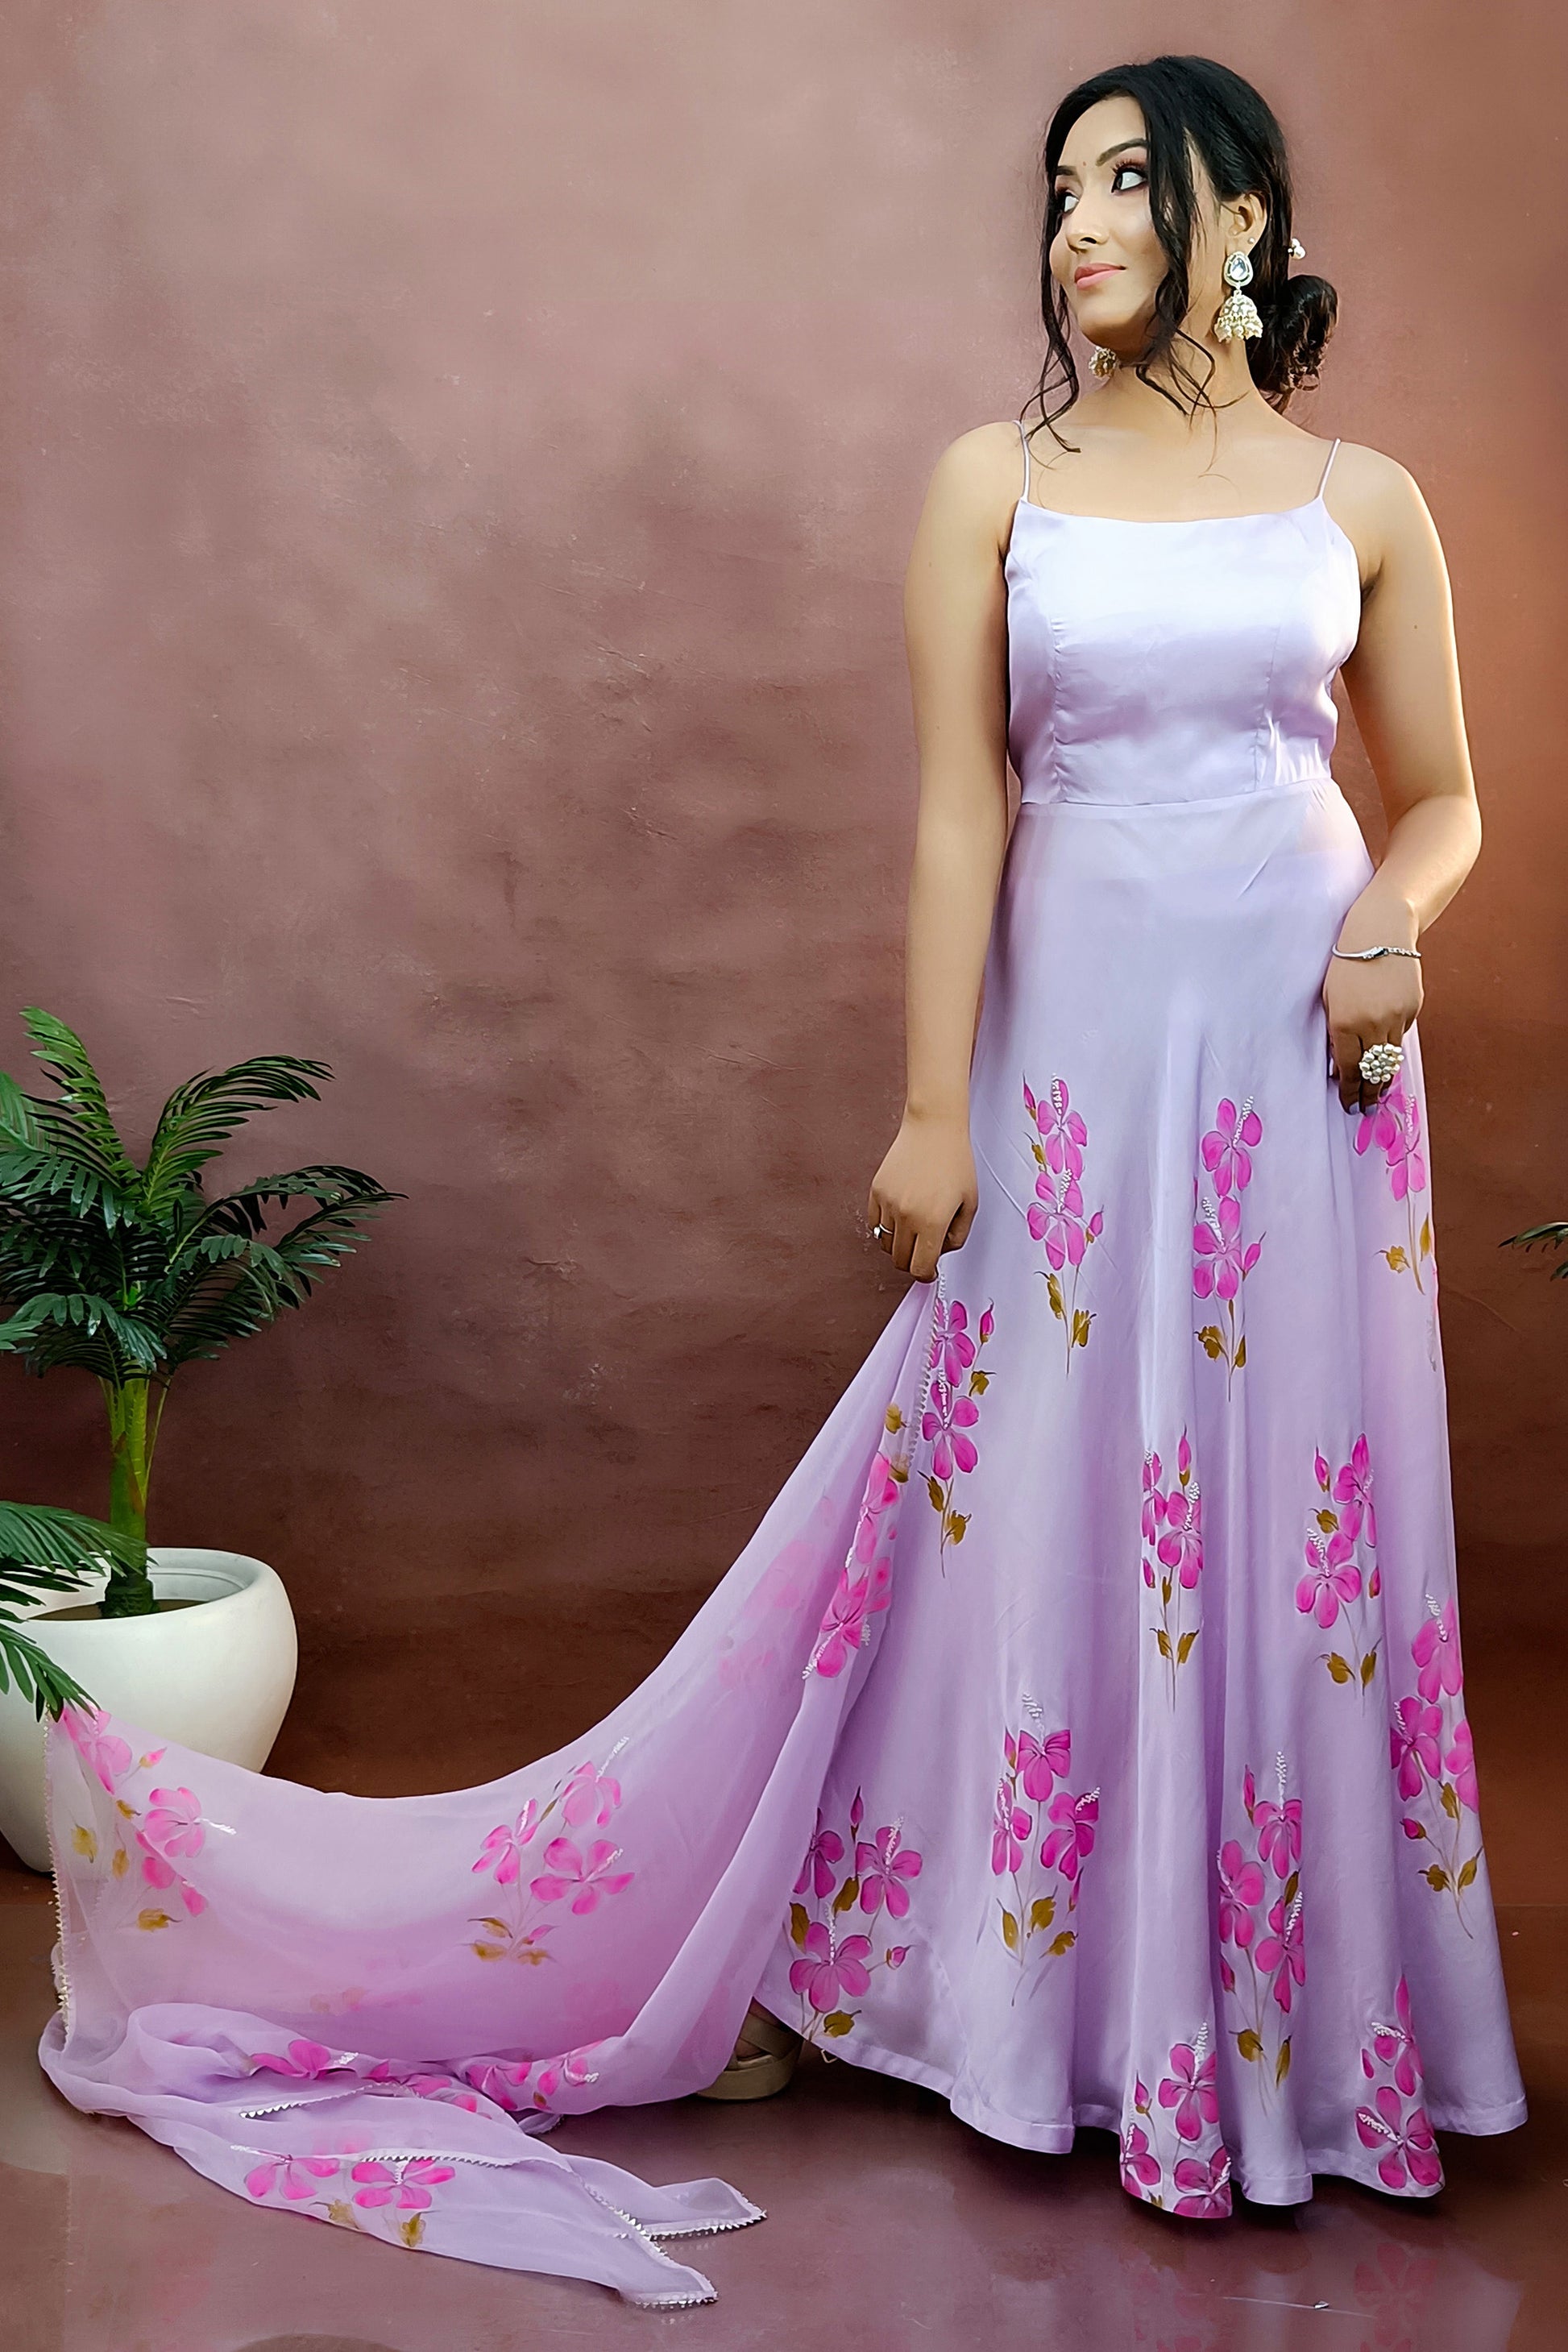 Lavender color  modal satin anarkali hand painted hibiscus flowers, adorned with pearl embroidery